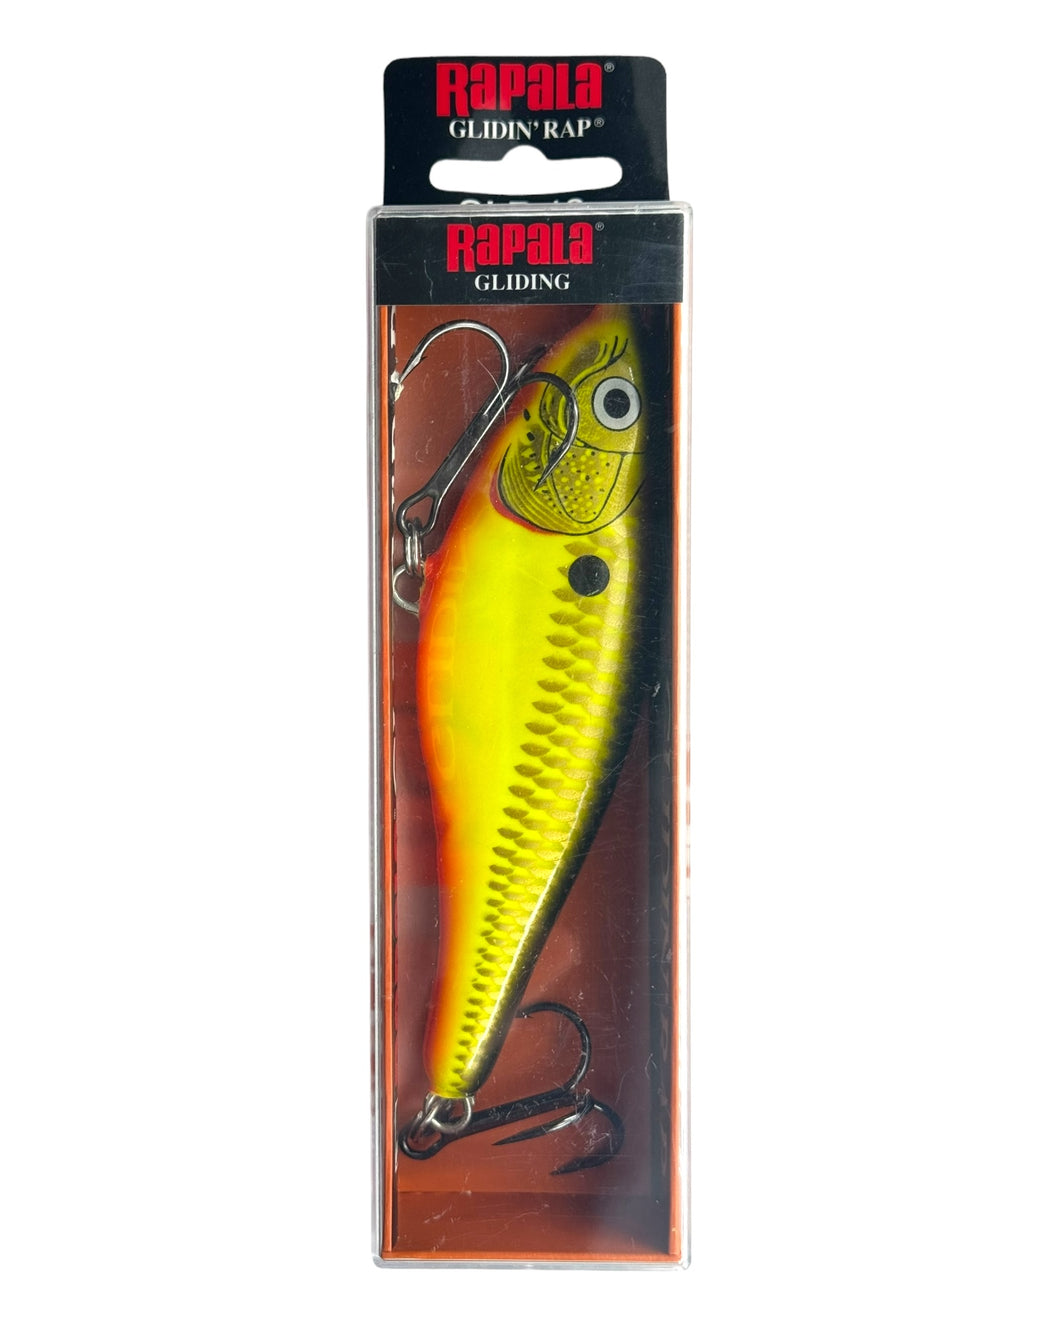 RAPALA LURES GLIDIN' RAP 12 Fishing Lure in HOT OLIVE